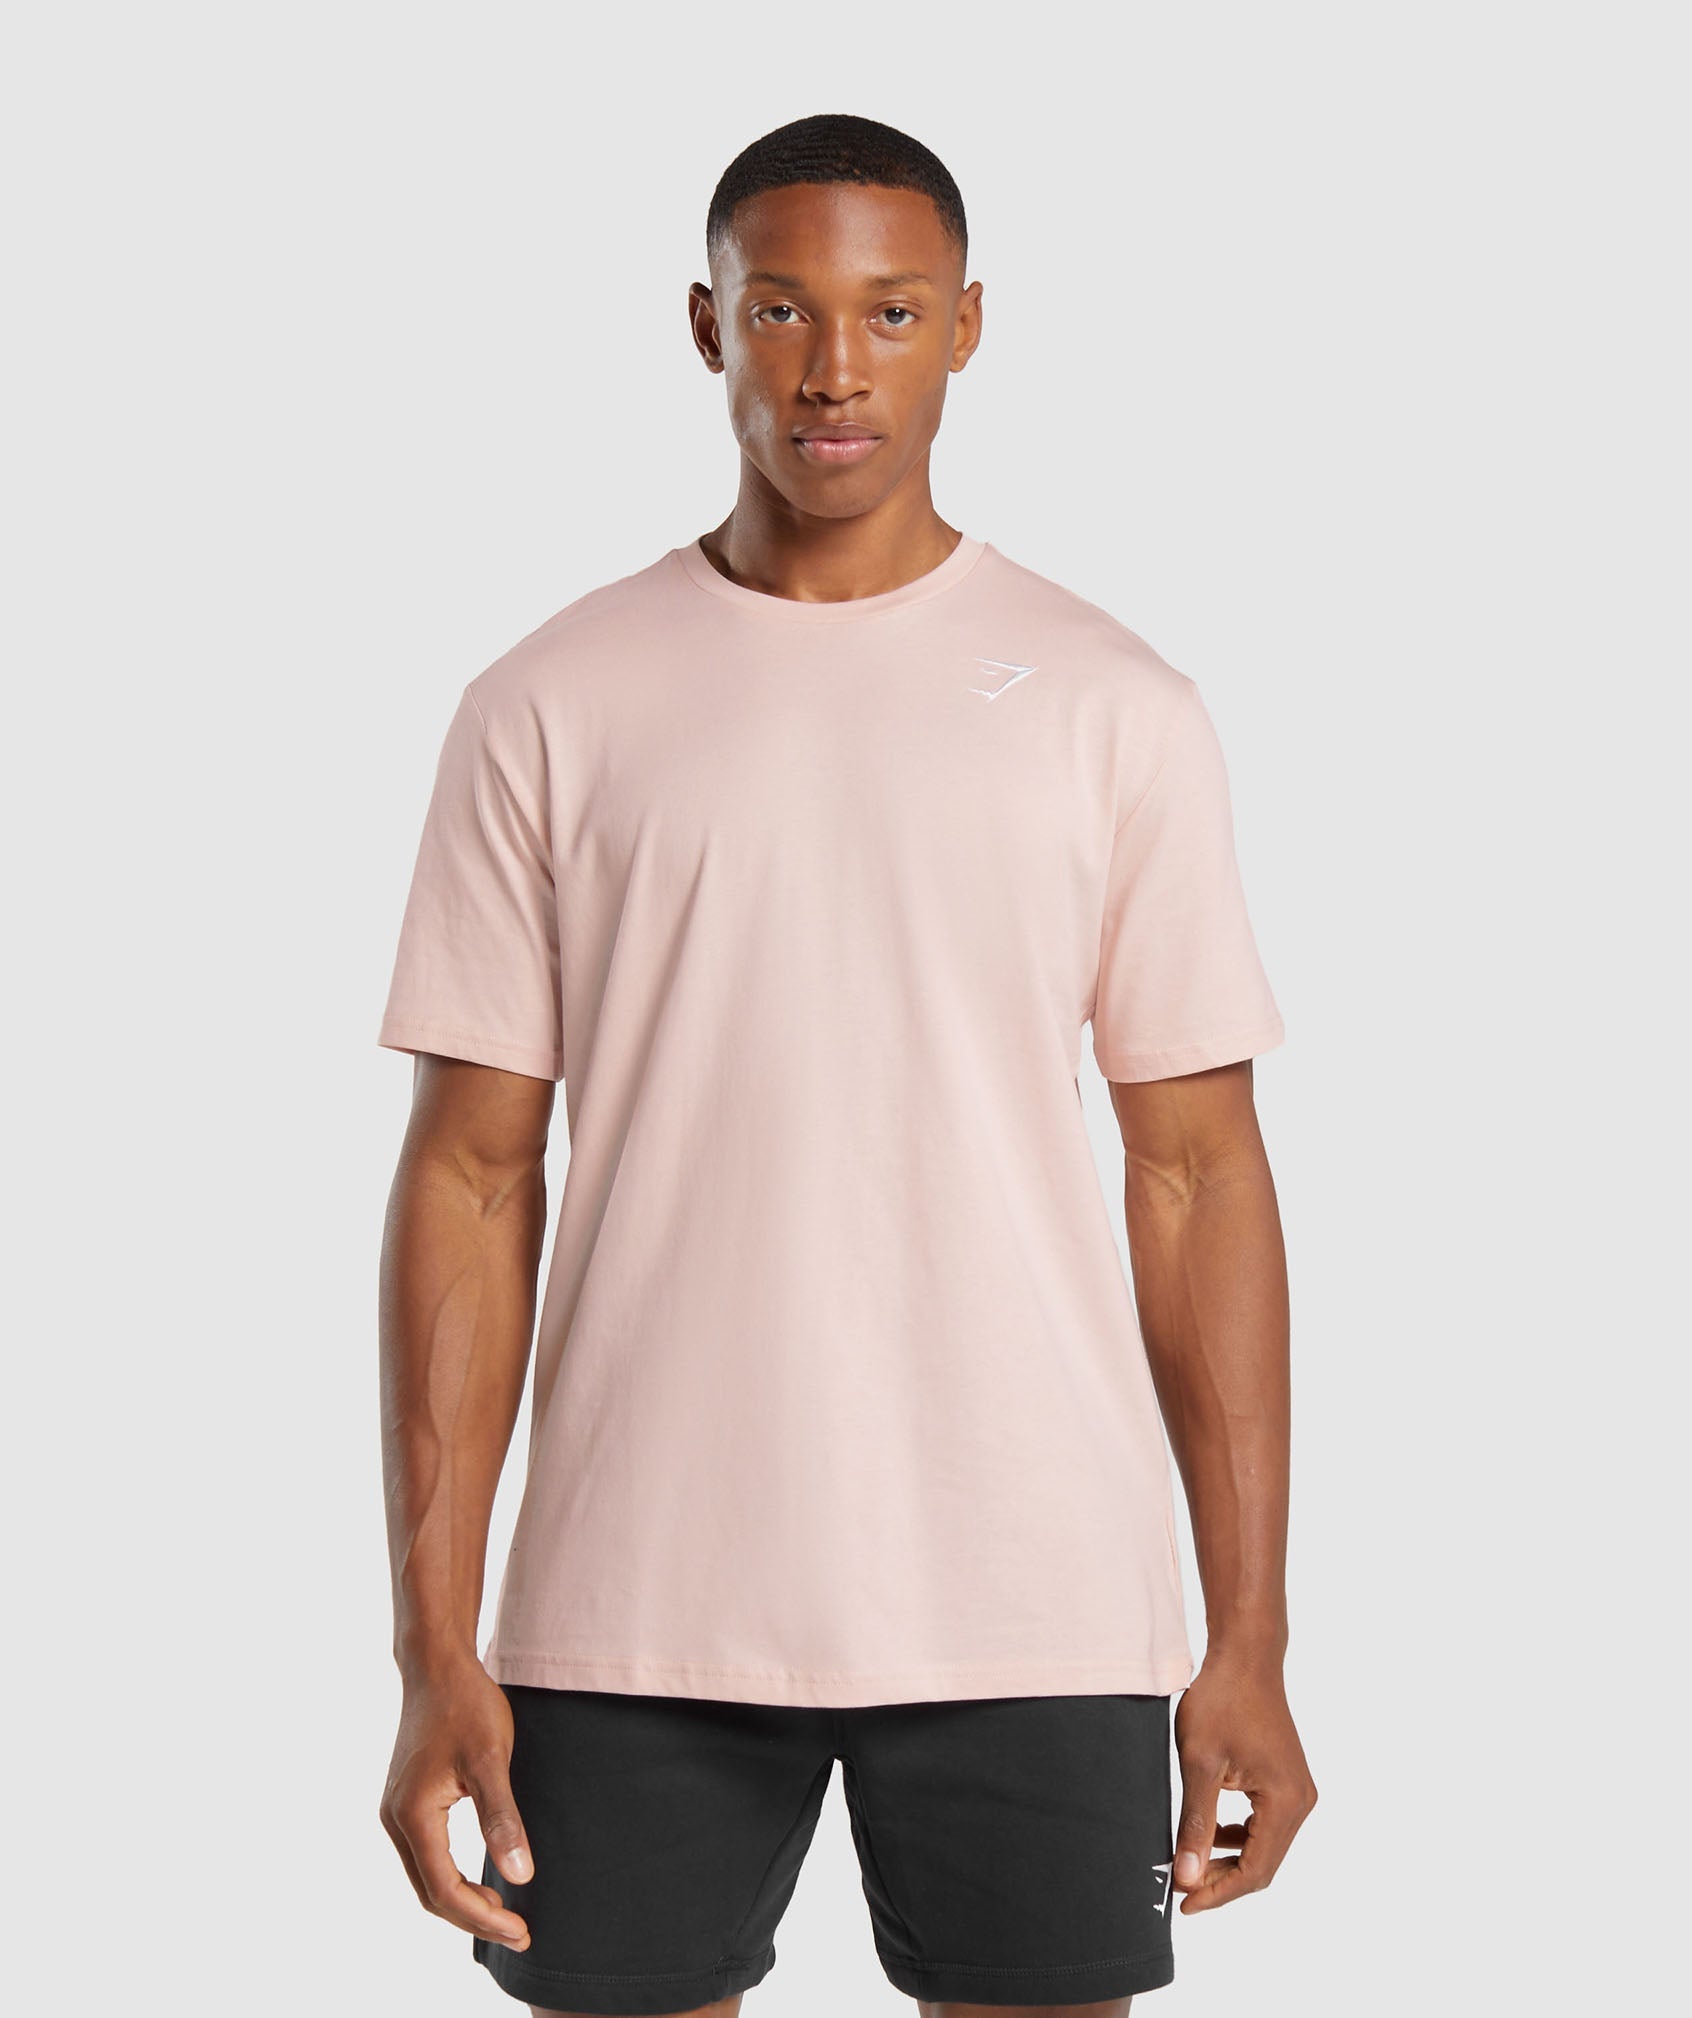 Crest T-Shirt in Misty Pink - view 1